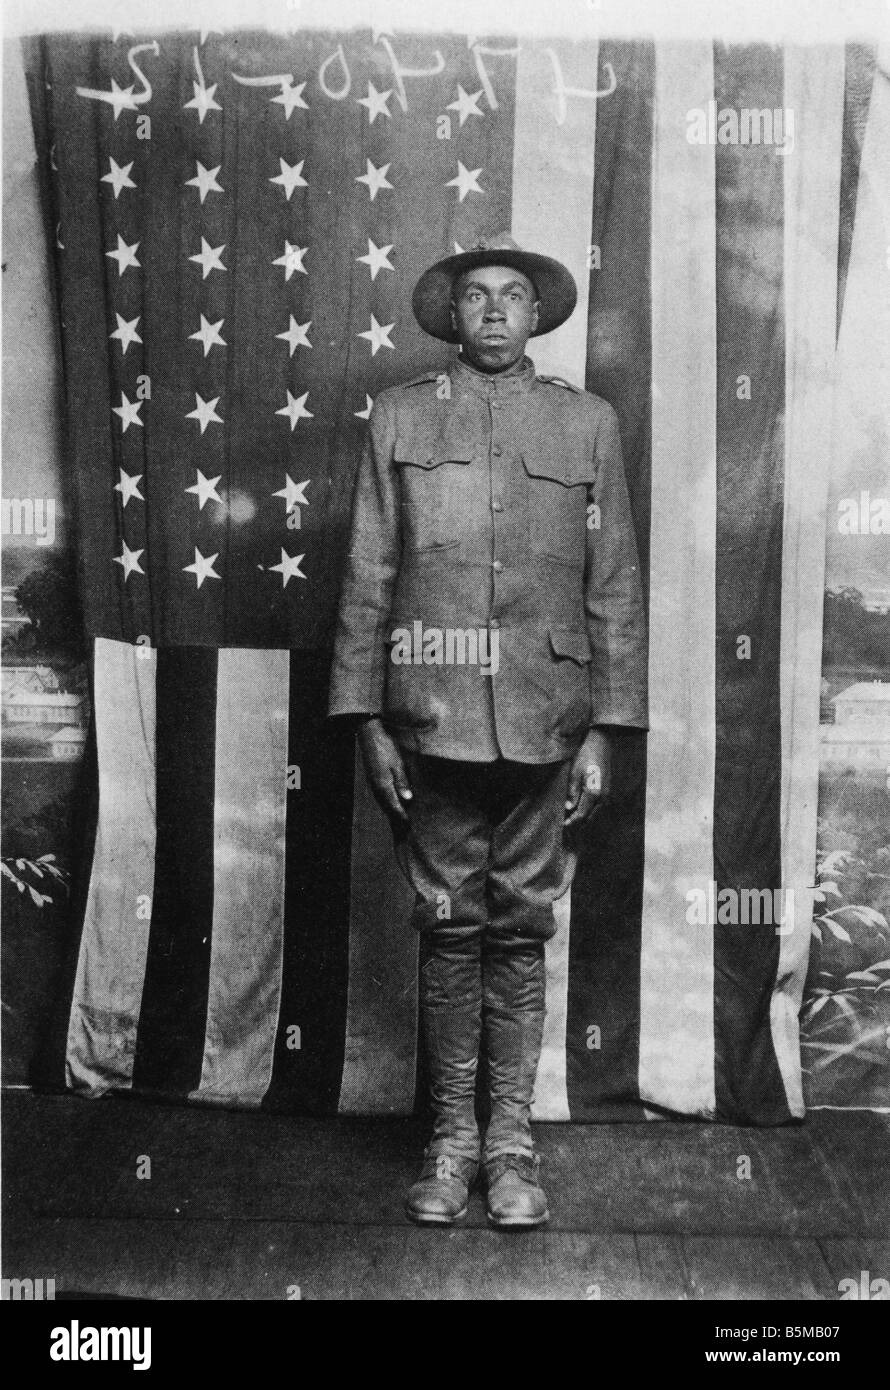 2 M70 U1 1917 2 E Black Soldier USA 1917 18 Photo Military Countries USA Unnamed soldier from the 92nd Division for black men in Stock Photo